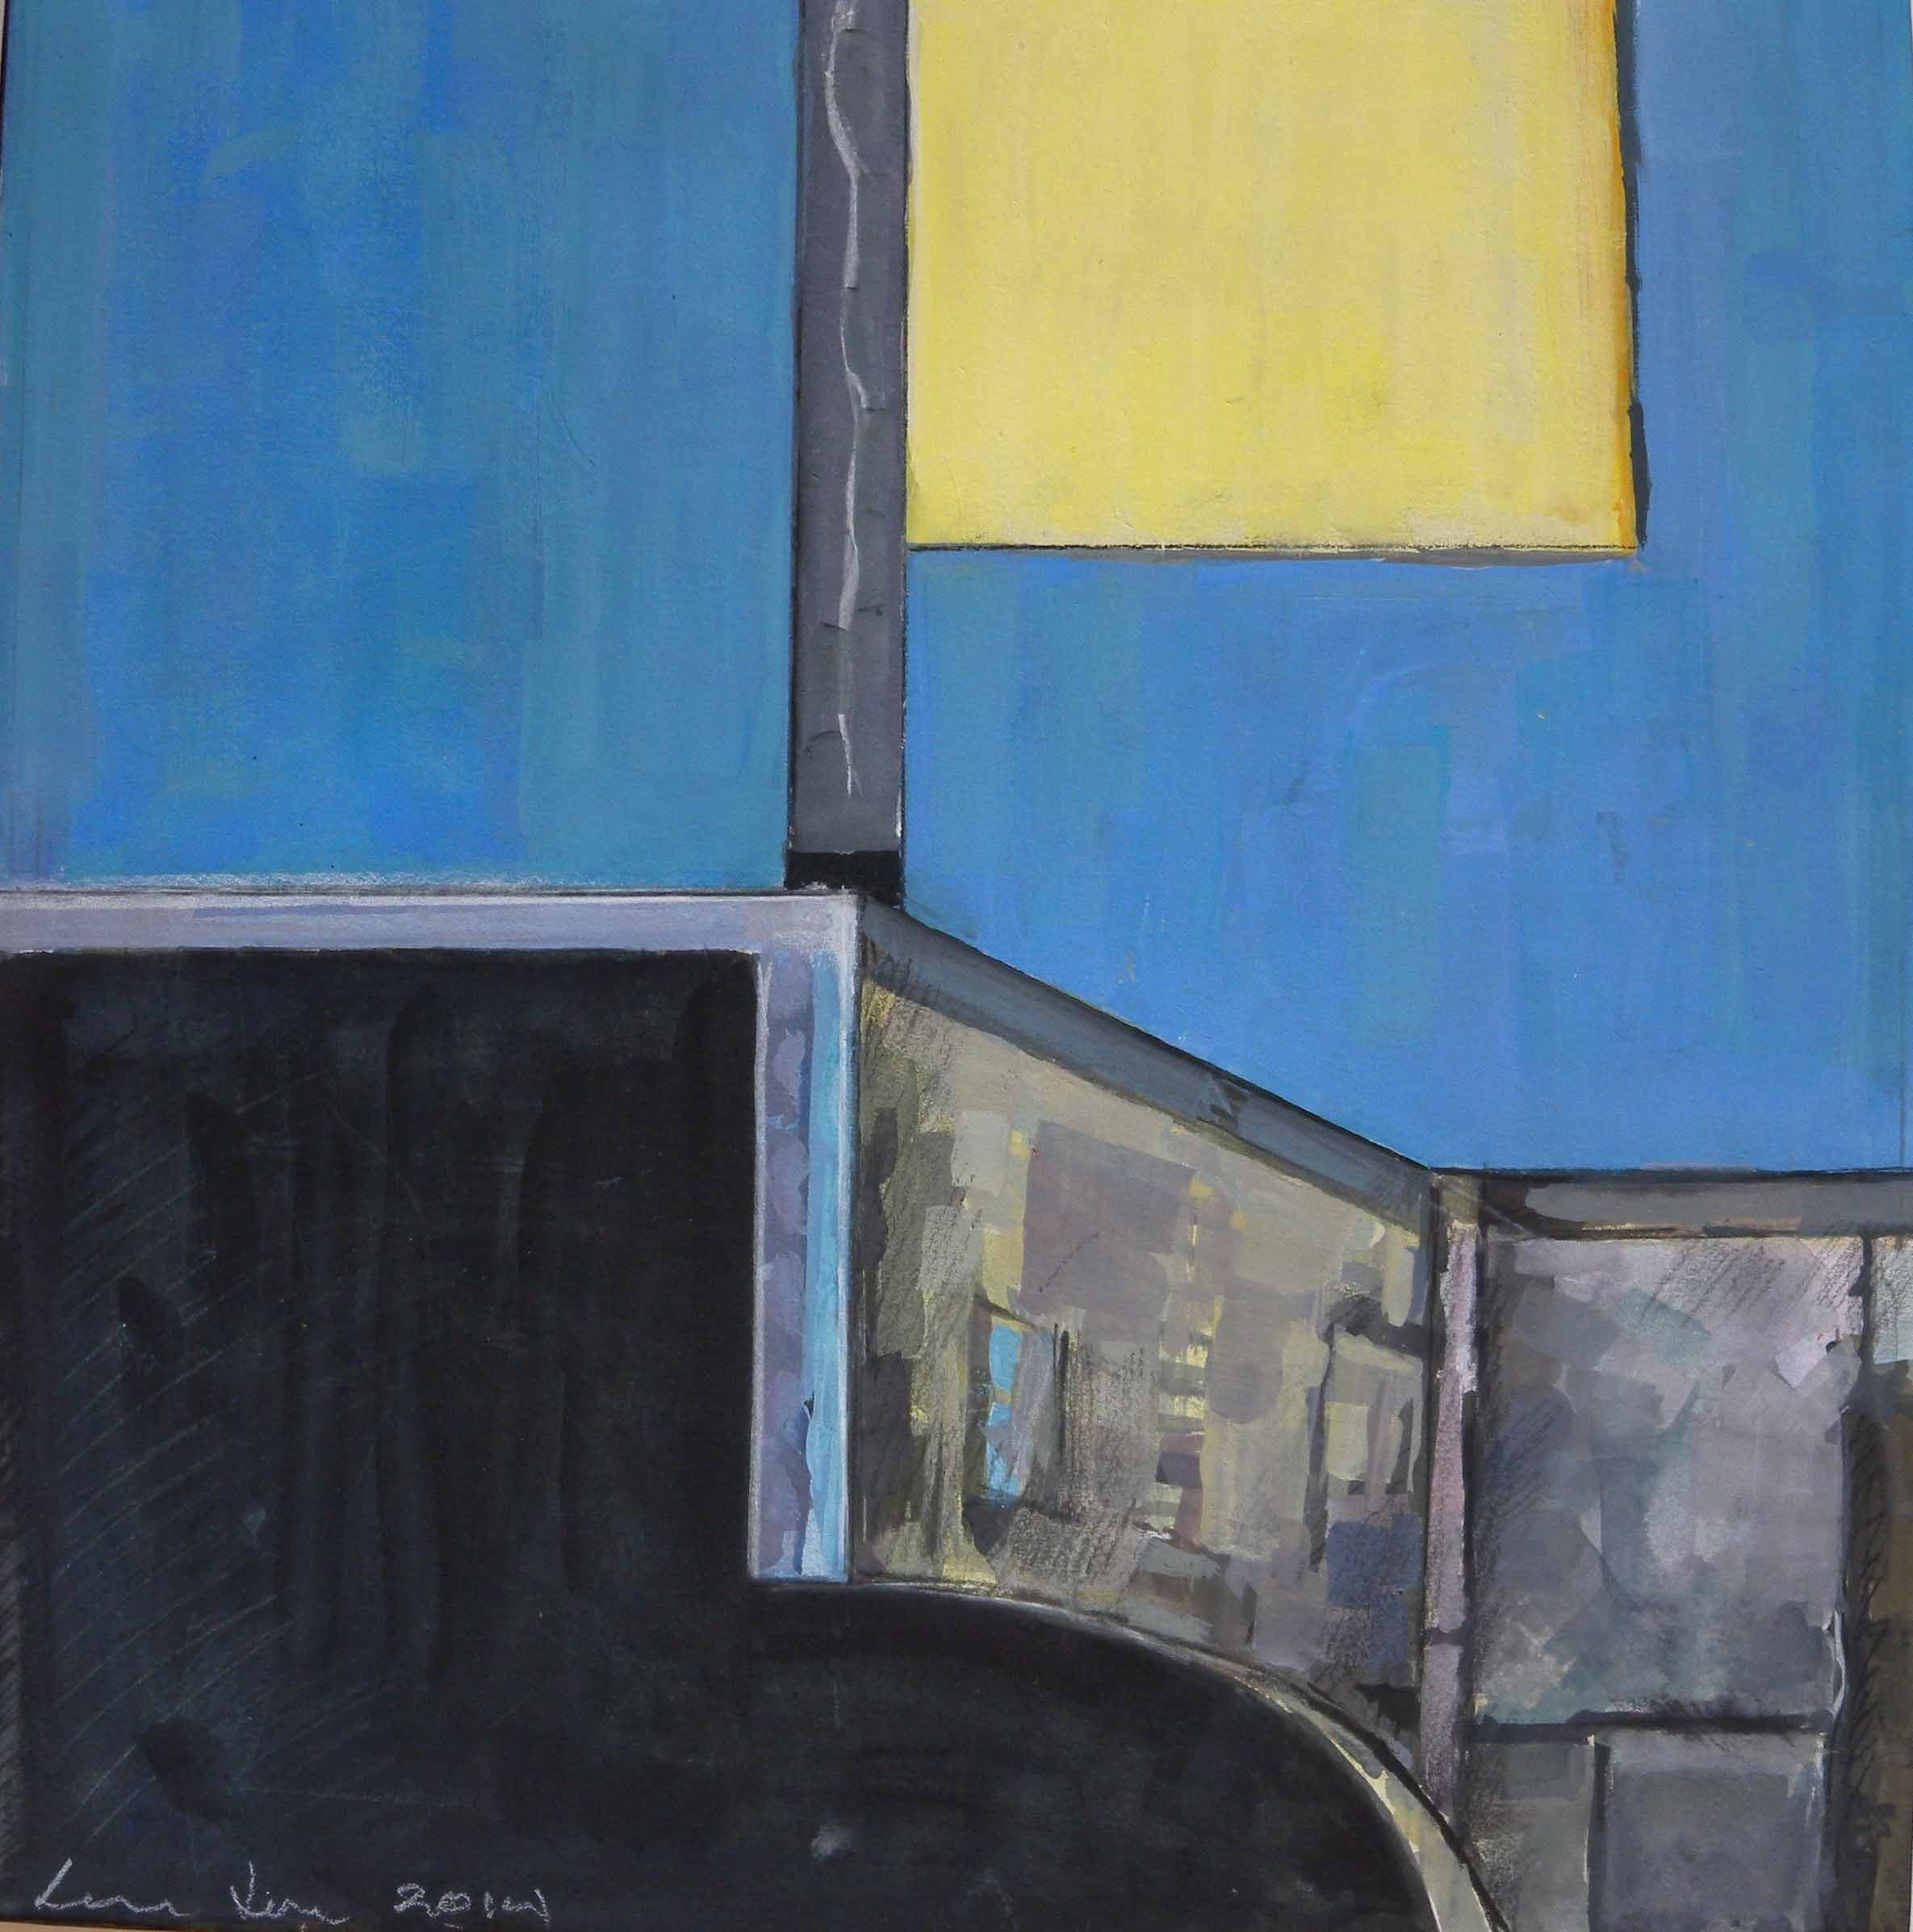  Bee Bee Roof Furniture #2 (blue),&nbsp;acrylic on canvas, 21 1/2" x 19", The Phillips Collection 